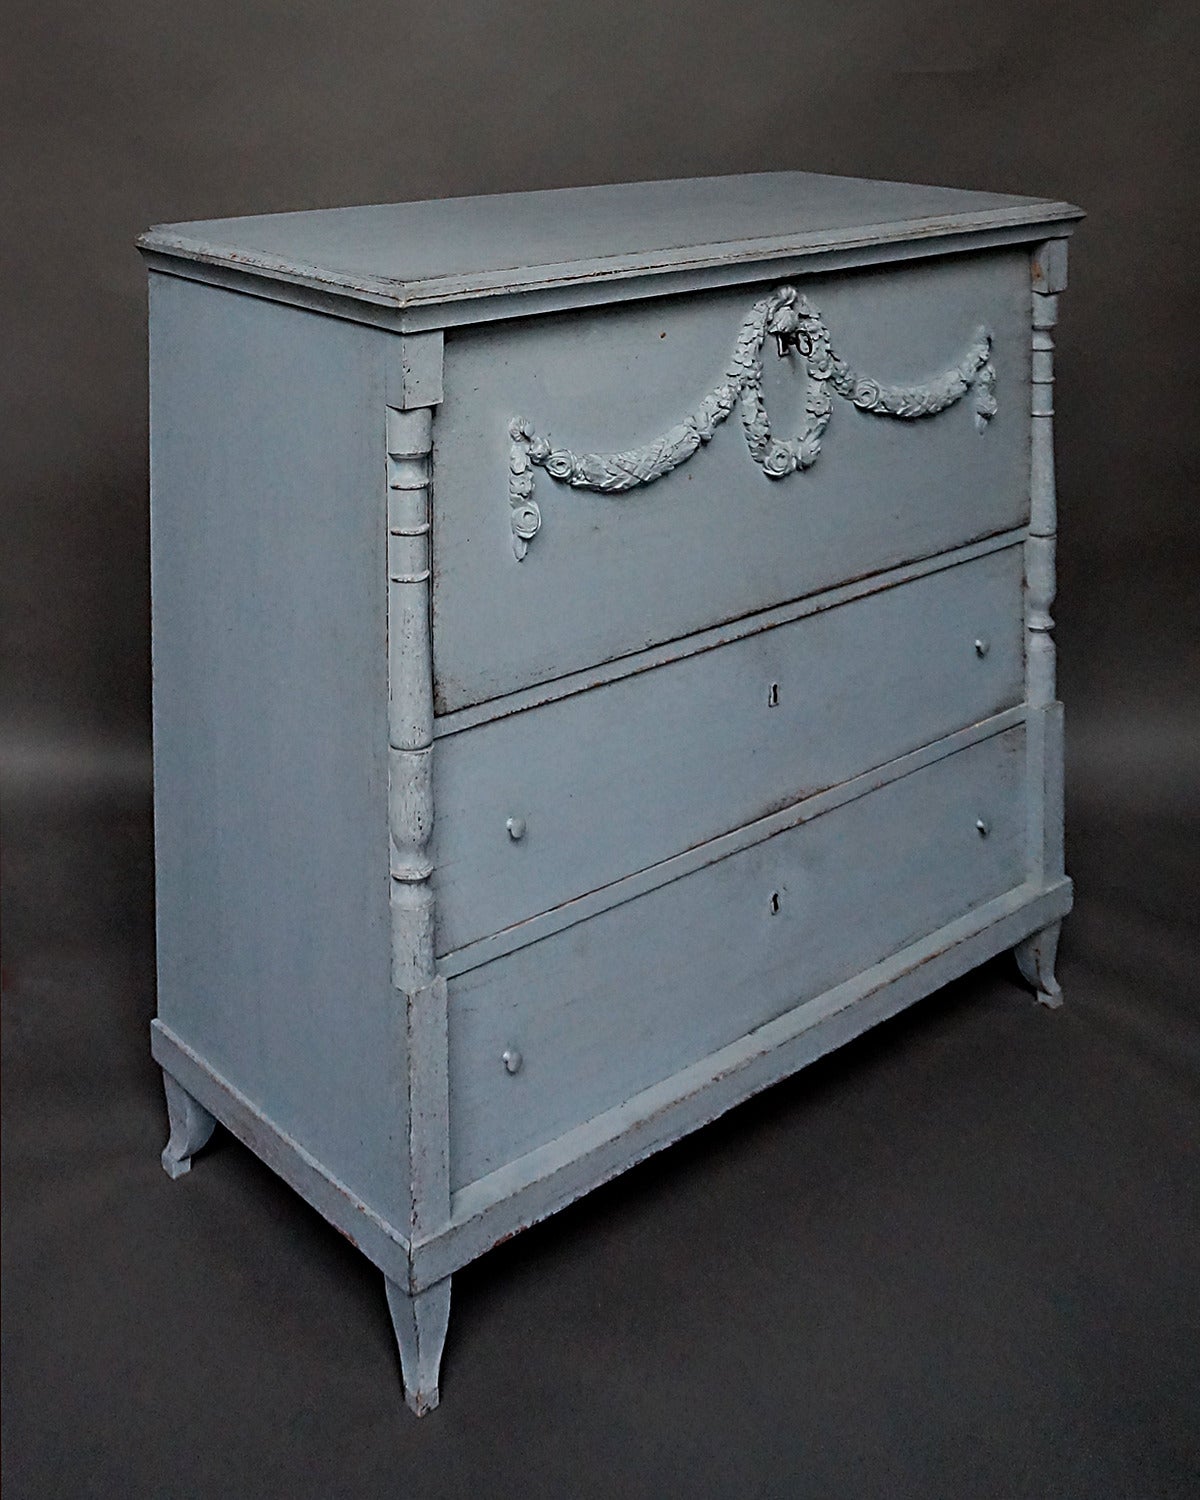 Period neoclassical chest of drawers, Sweden circa 1830, with applied laurel wreath and swags on the top drawer. Turned half-columns at either side above flaring French feet. Inside the top drawer are another three small drawers.